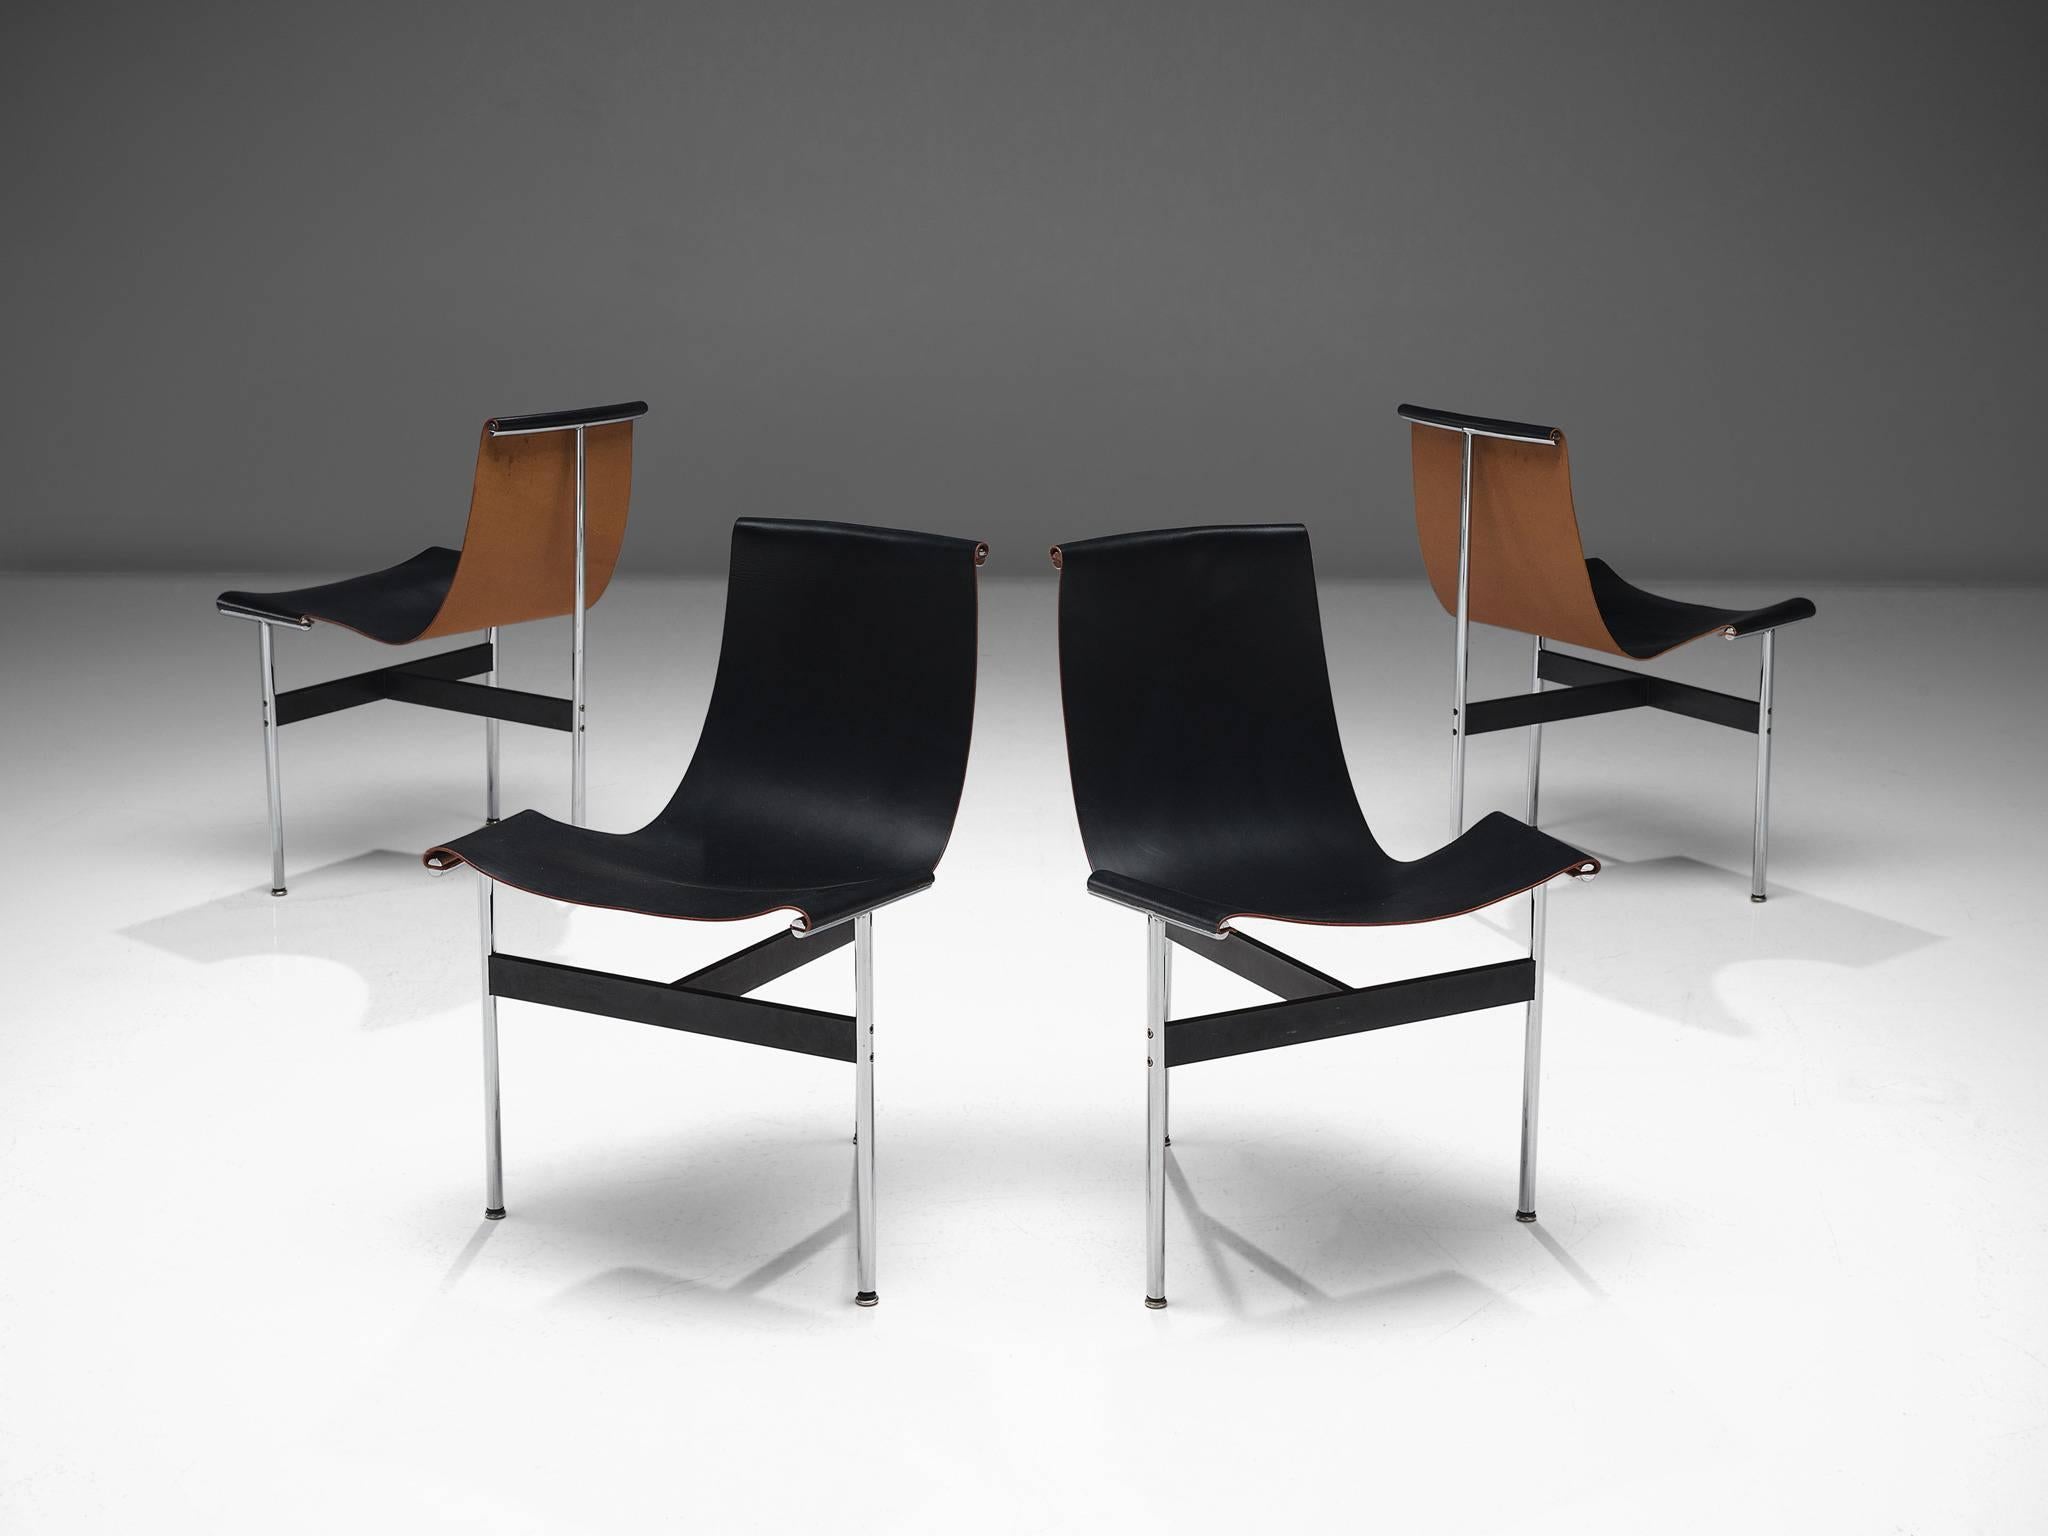 Katavolos, Kelley and Littell, chair, chrome-plated steel, enameled steel and black leather, United States, 1952.

This set of elegant and playful three-legged chairs seems almost too delicate to sit in. But in fact these sensuous chairs are very